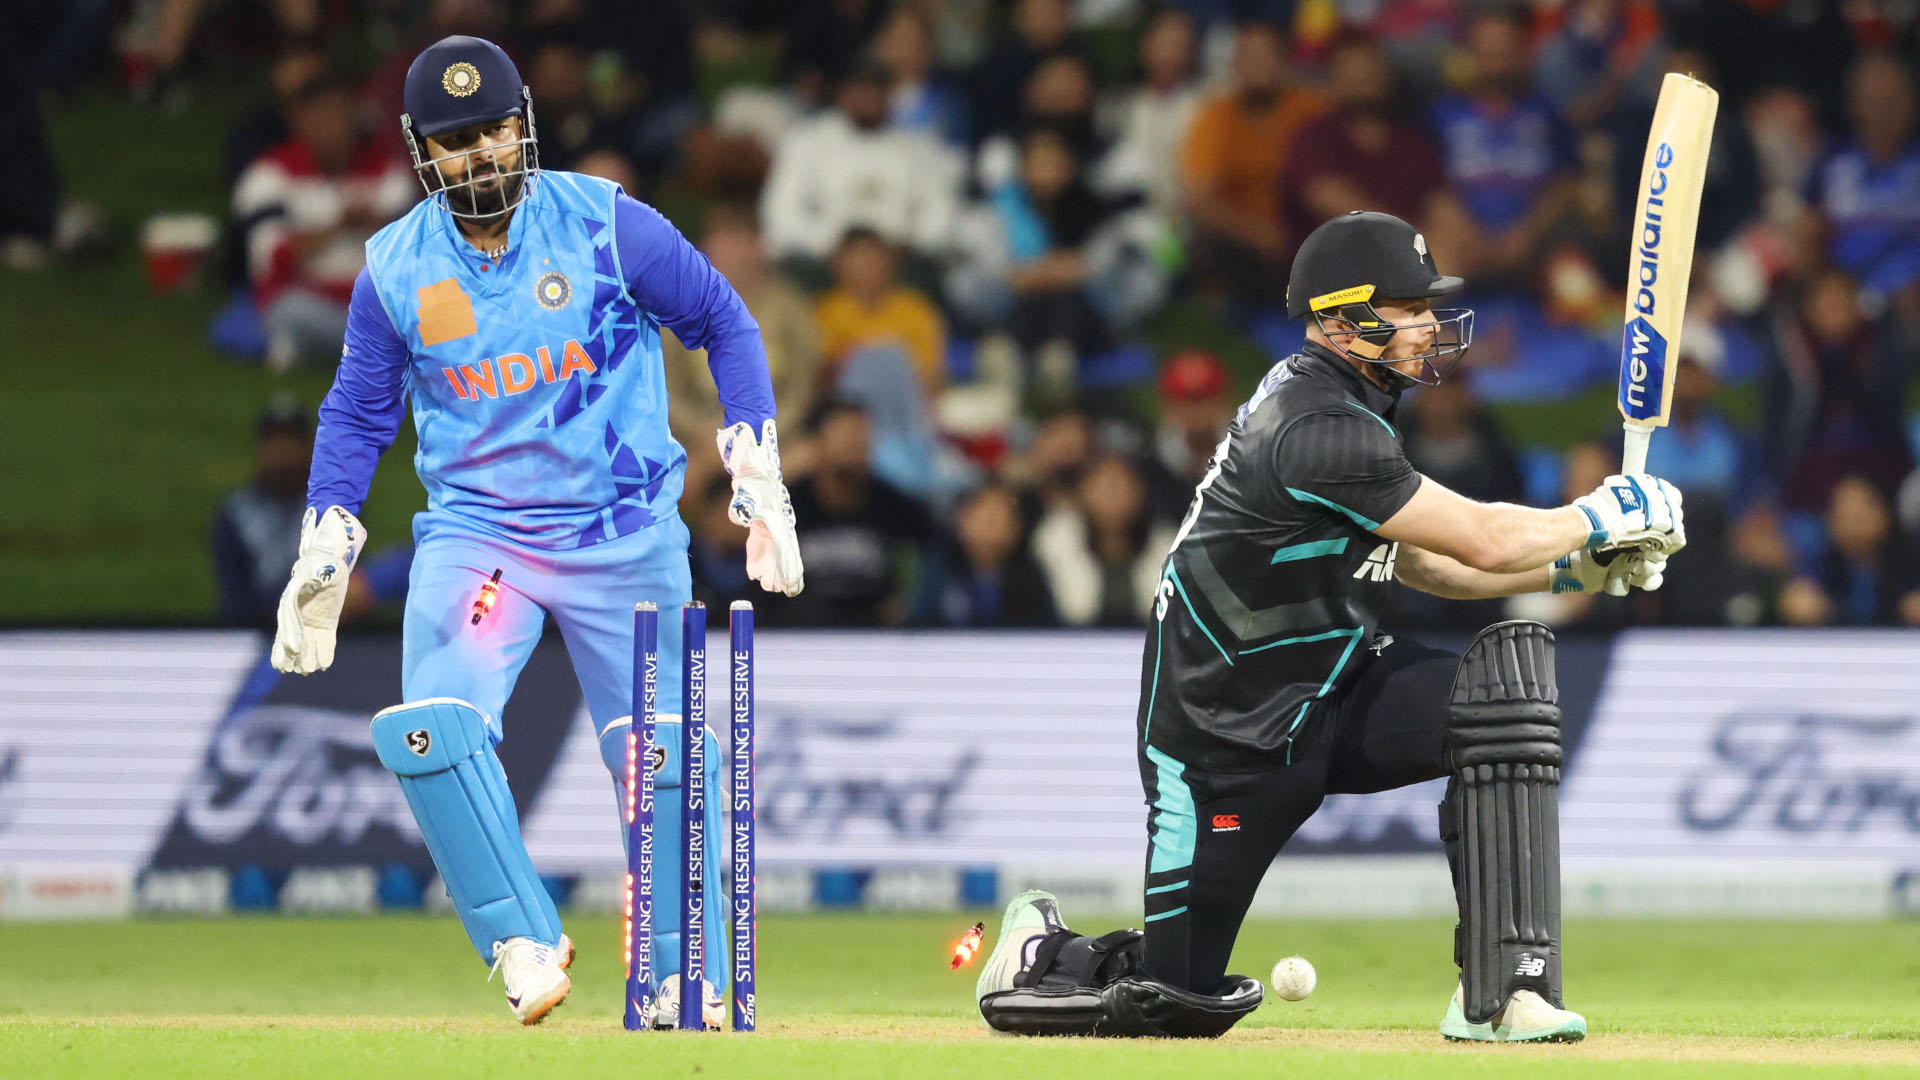 How to watch New Zealand vs India live stream 1st ODI cricket online from anywhere TechRadar